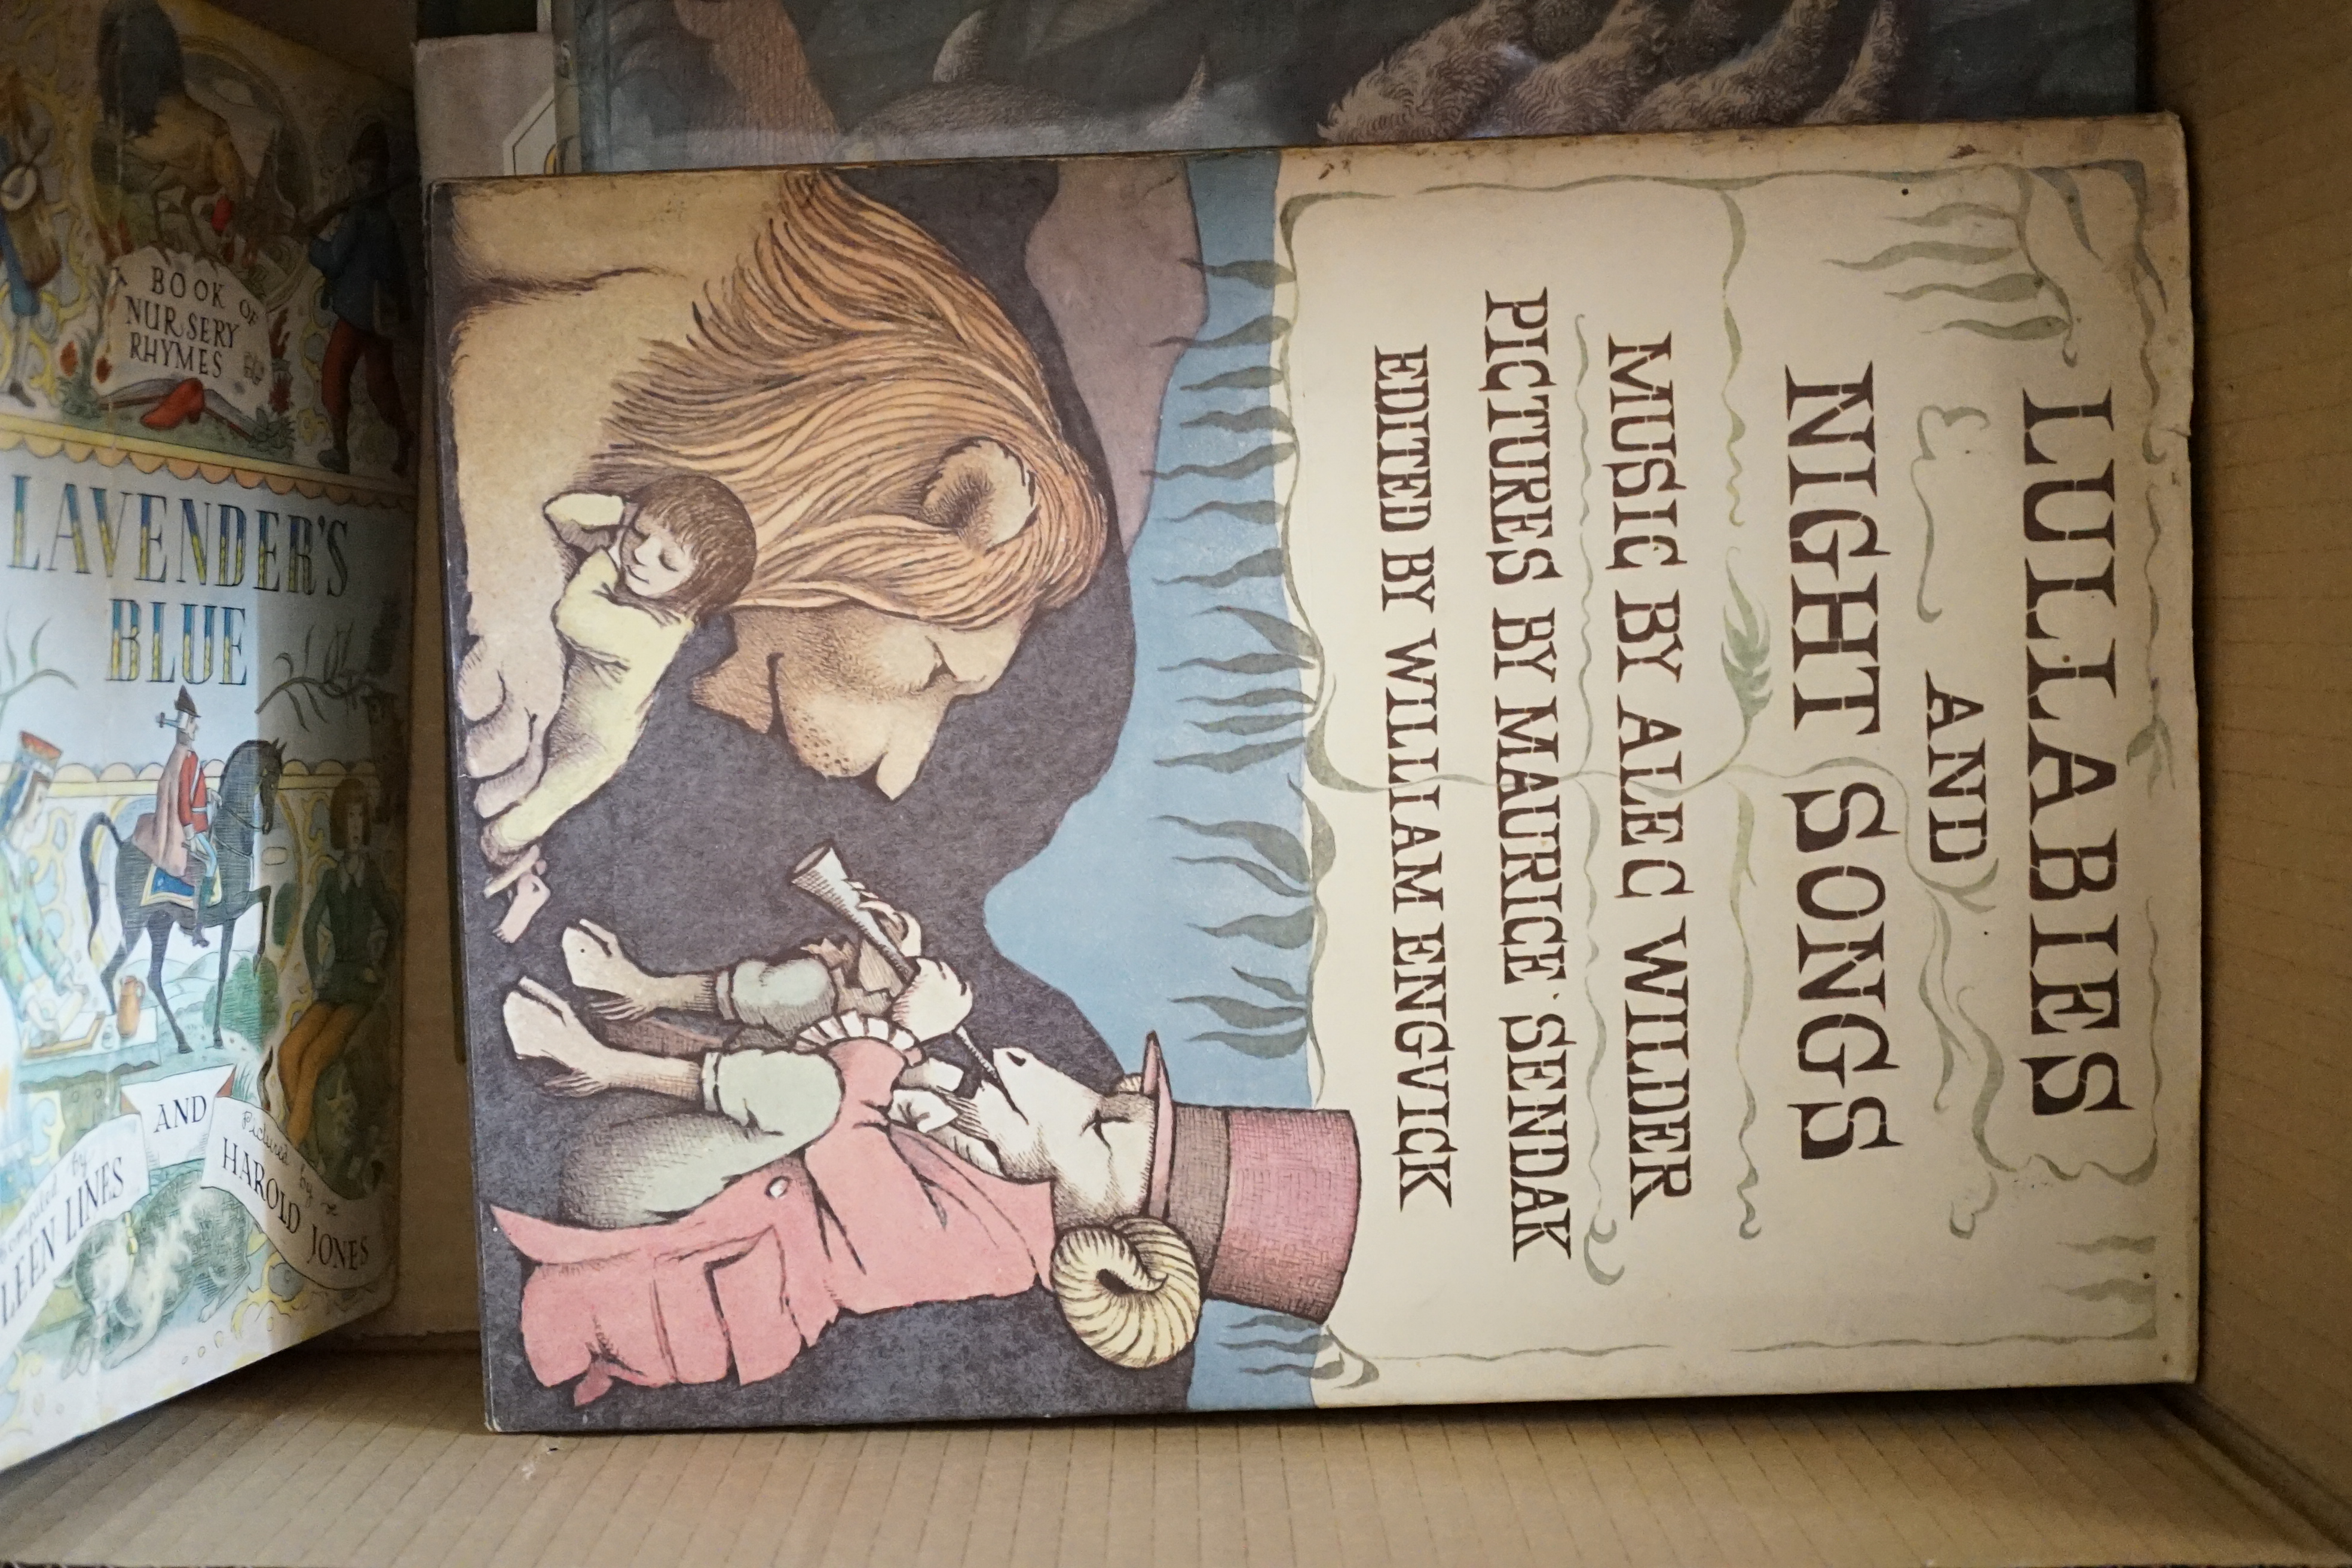 Lanes, Selma G. - The Art of Maurice Sendak. 1st edition. d-page coloured pictorial title, coloured plates (some folded, 1 a pop-up) and other illus.; publisher's coloured pictorial boards and printed cellophane d/wrappe